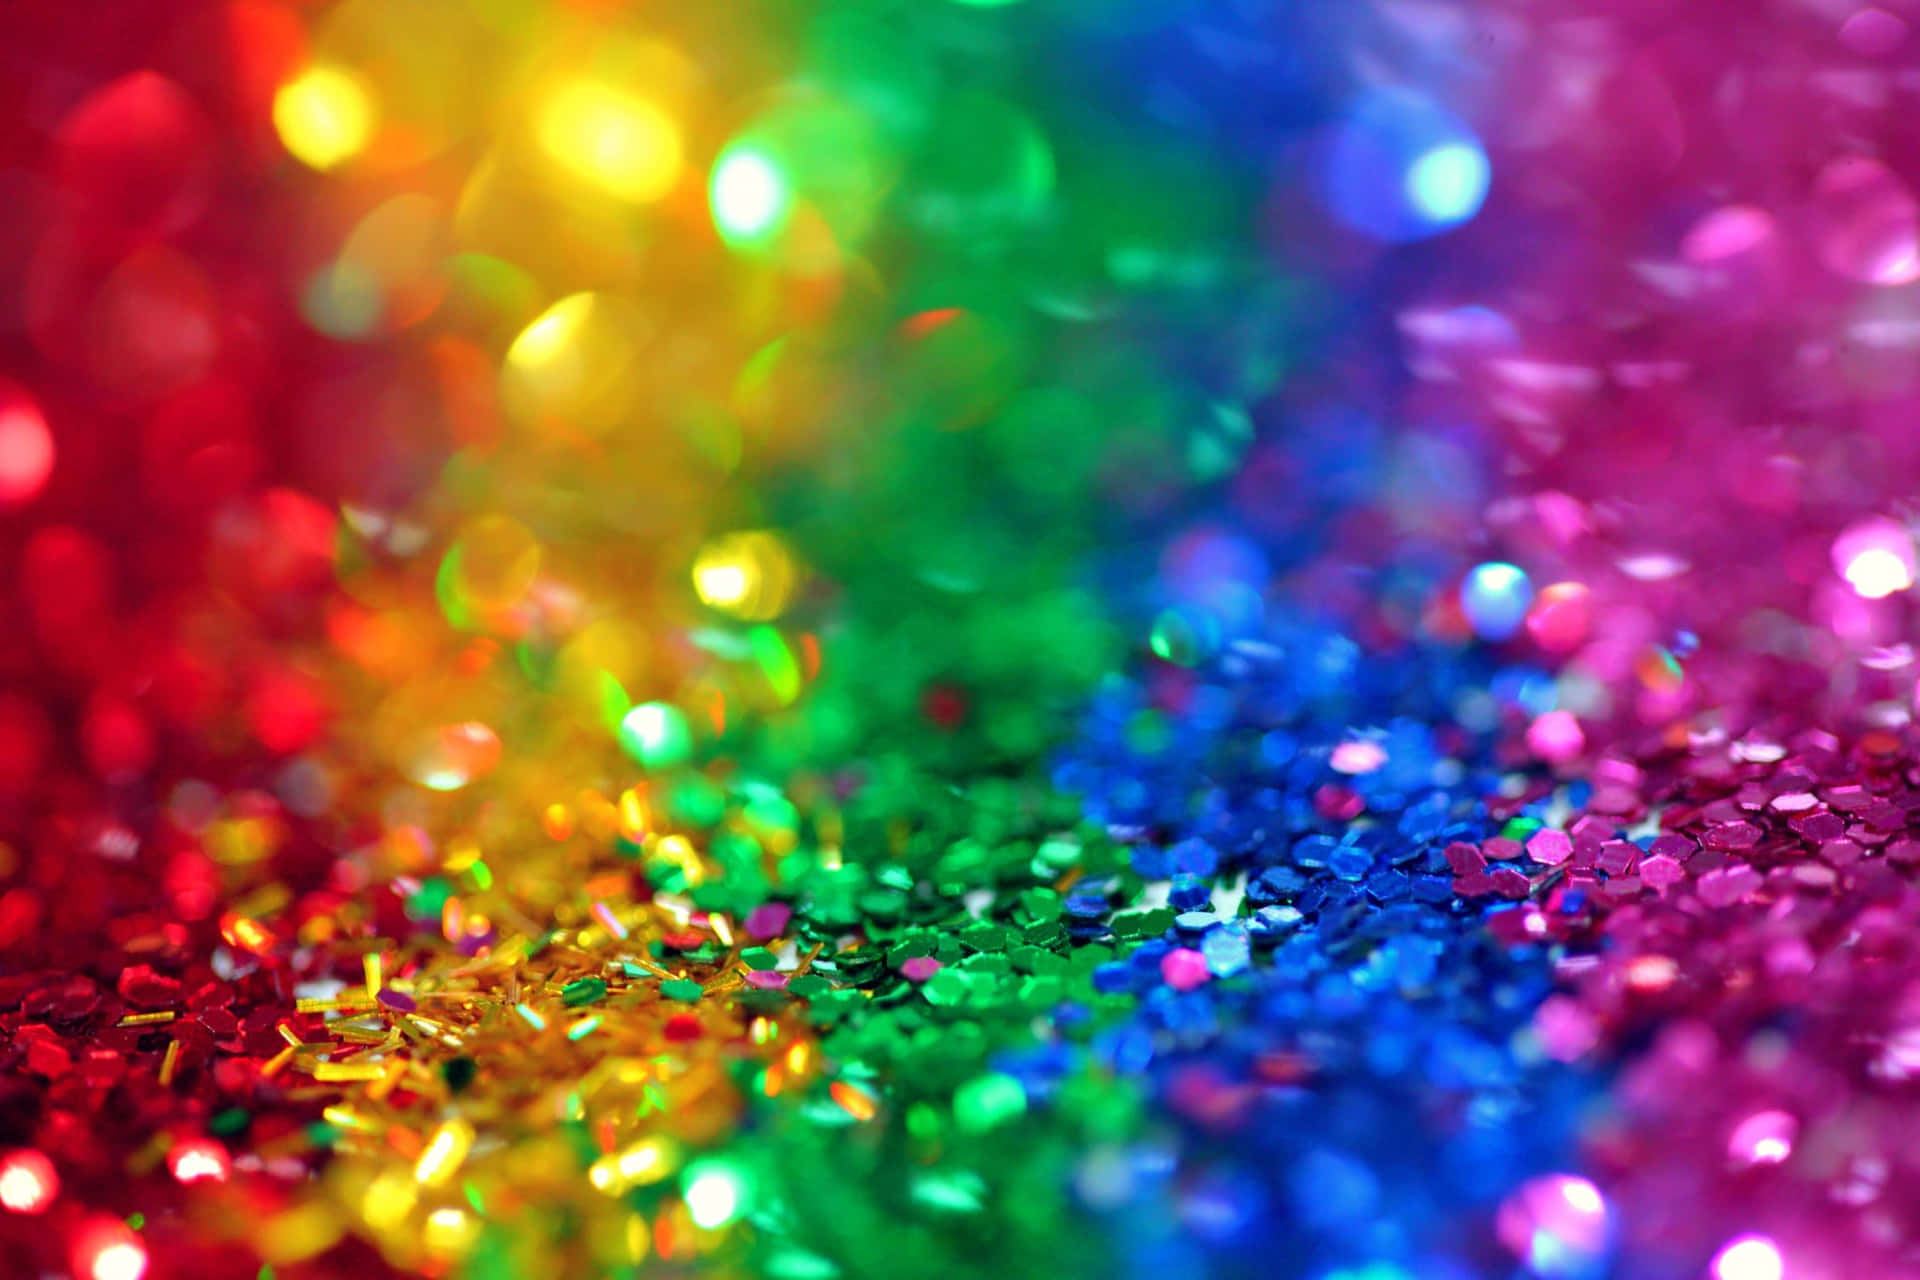 100+] Rainbow Glitter Background s for FREE 